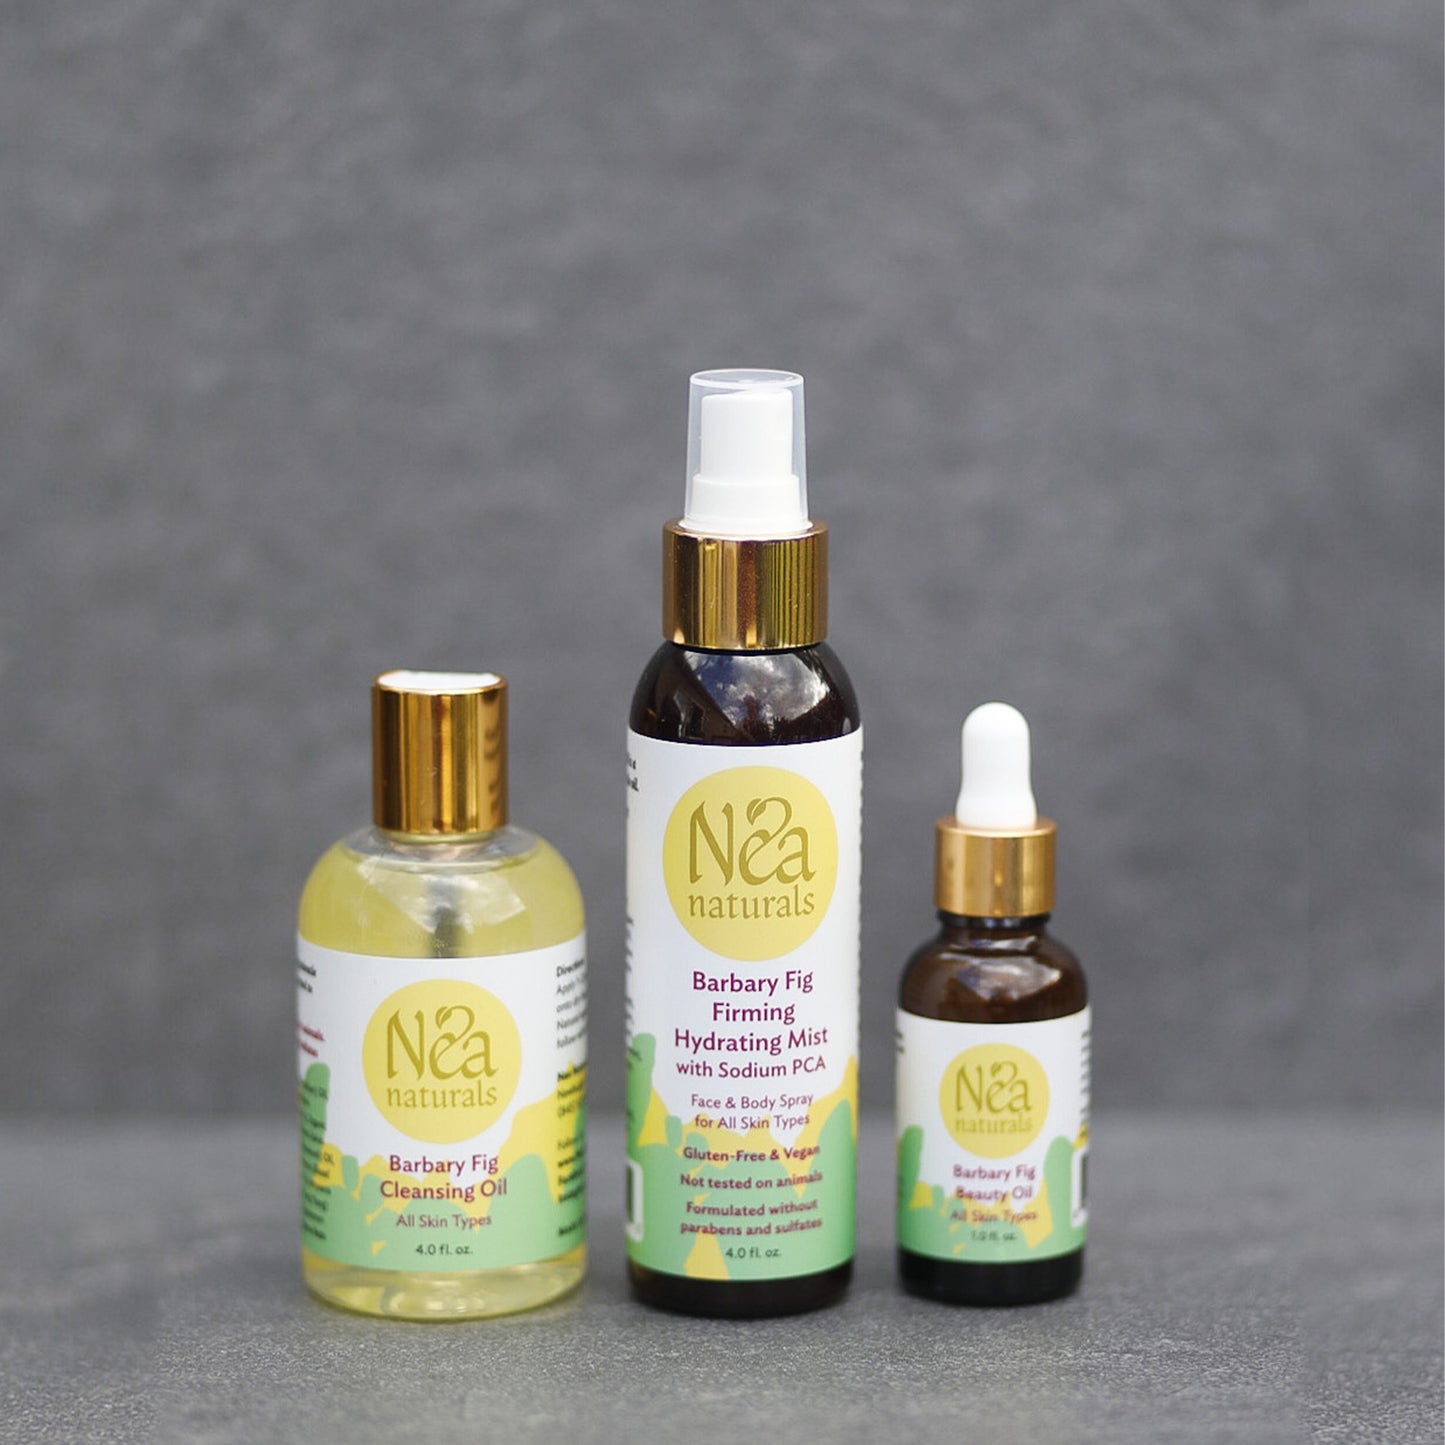 Barbary Fig Cleansing Oil, Firming Moisturizing Mist & Beauty Oil - 3 Piece Set